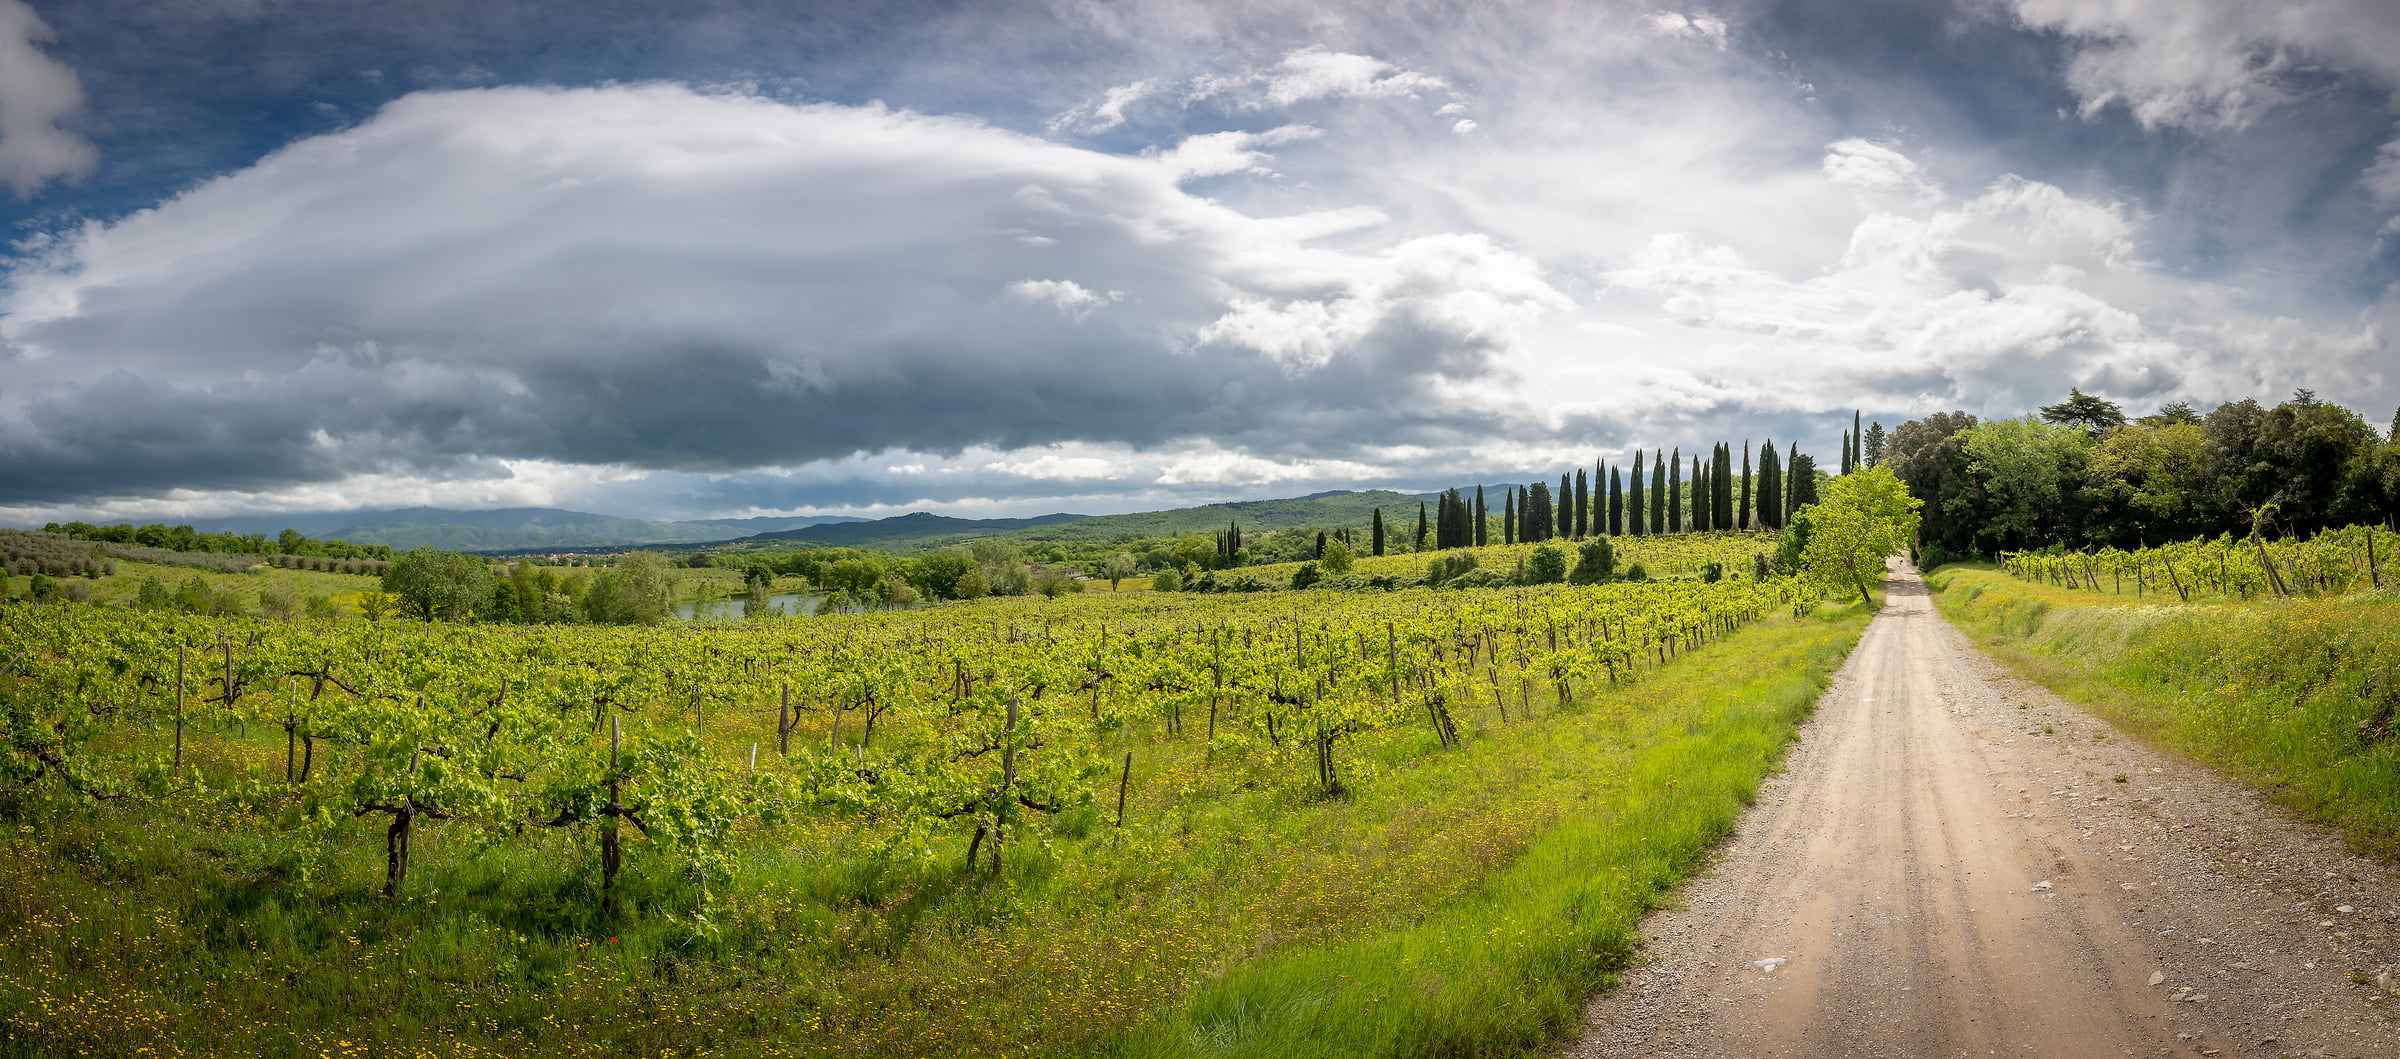 133 megapixels! A very high resolution, large-format VAST photo print of a dirt road next to a vinyard in Tuscany, Italy; photograph created by Justin Katz in Tenuta Lupinari, Tuscany, Italy.